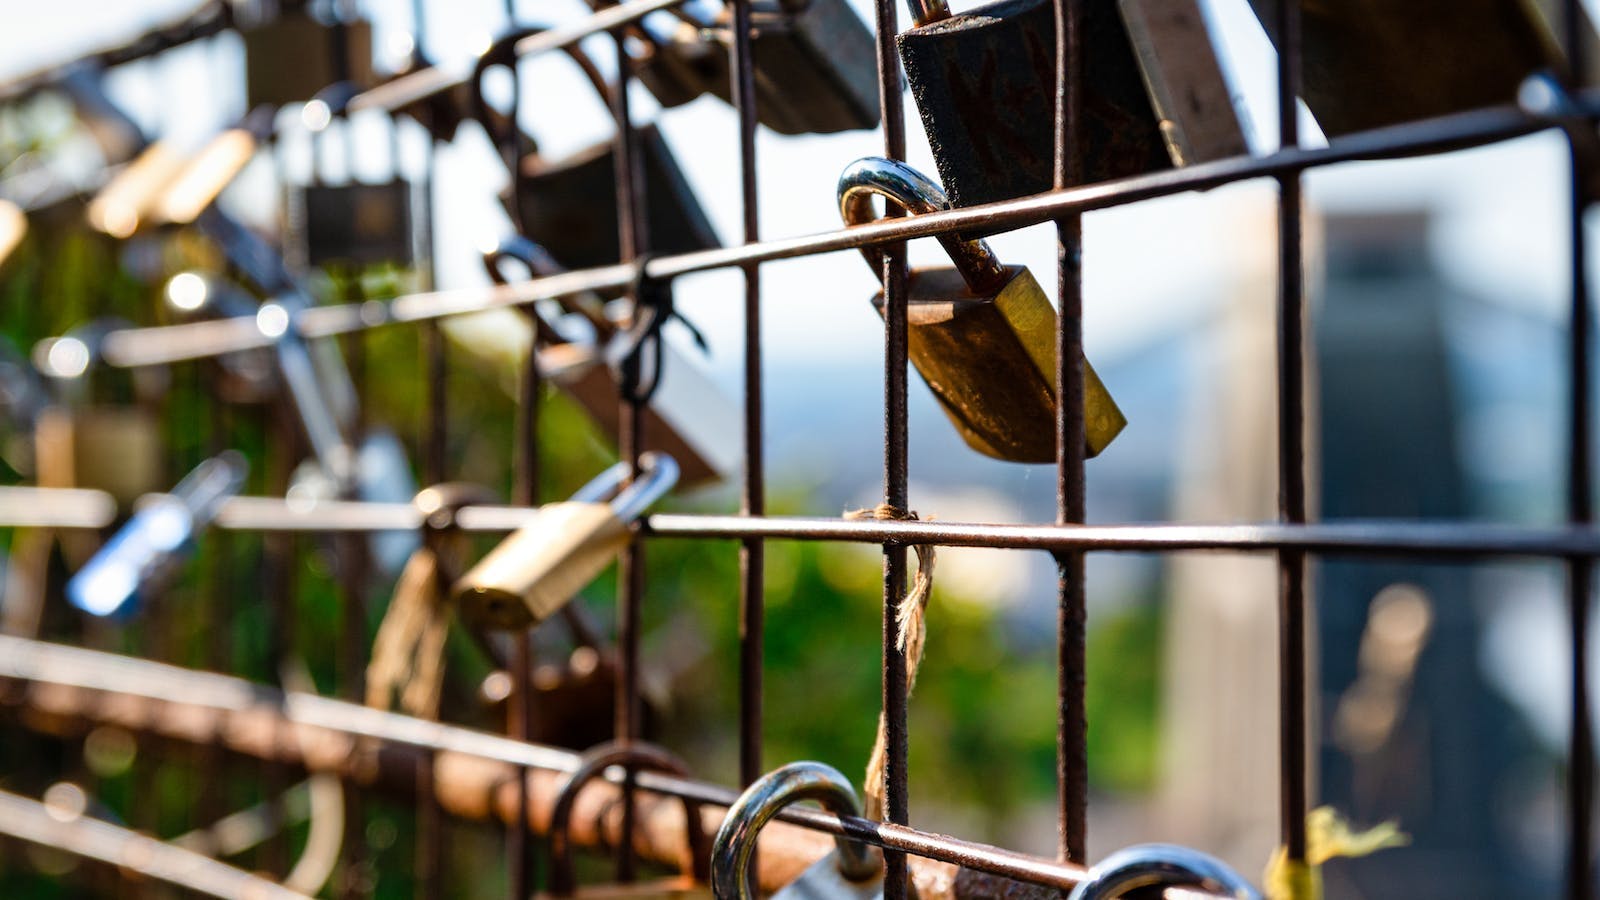 A chainlink fence with numerous locks attached to it.